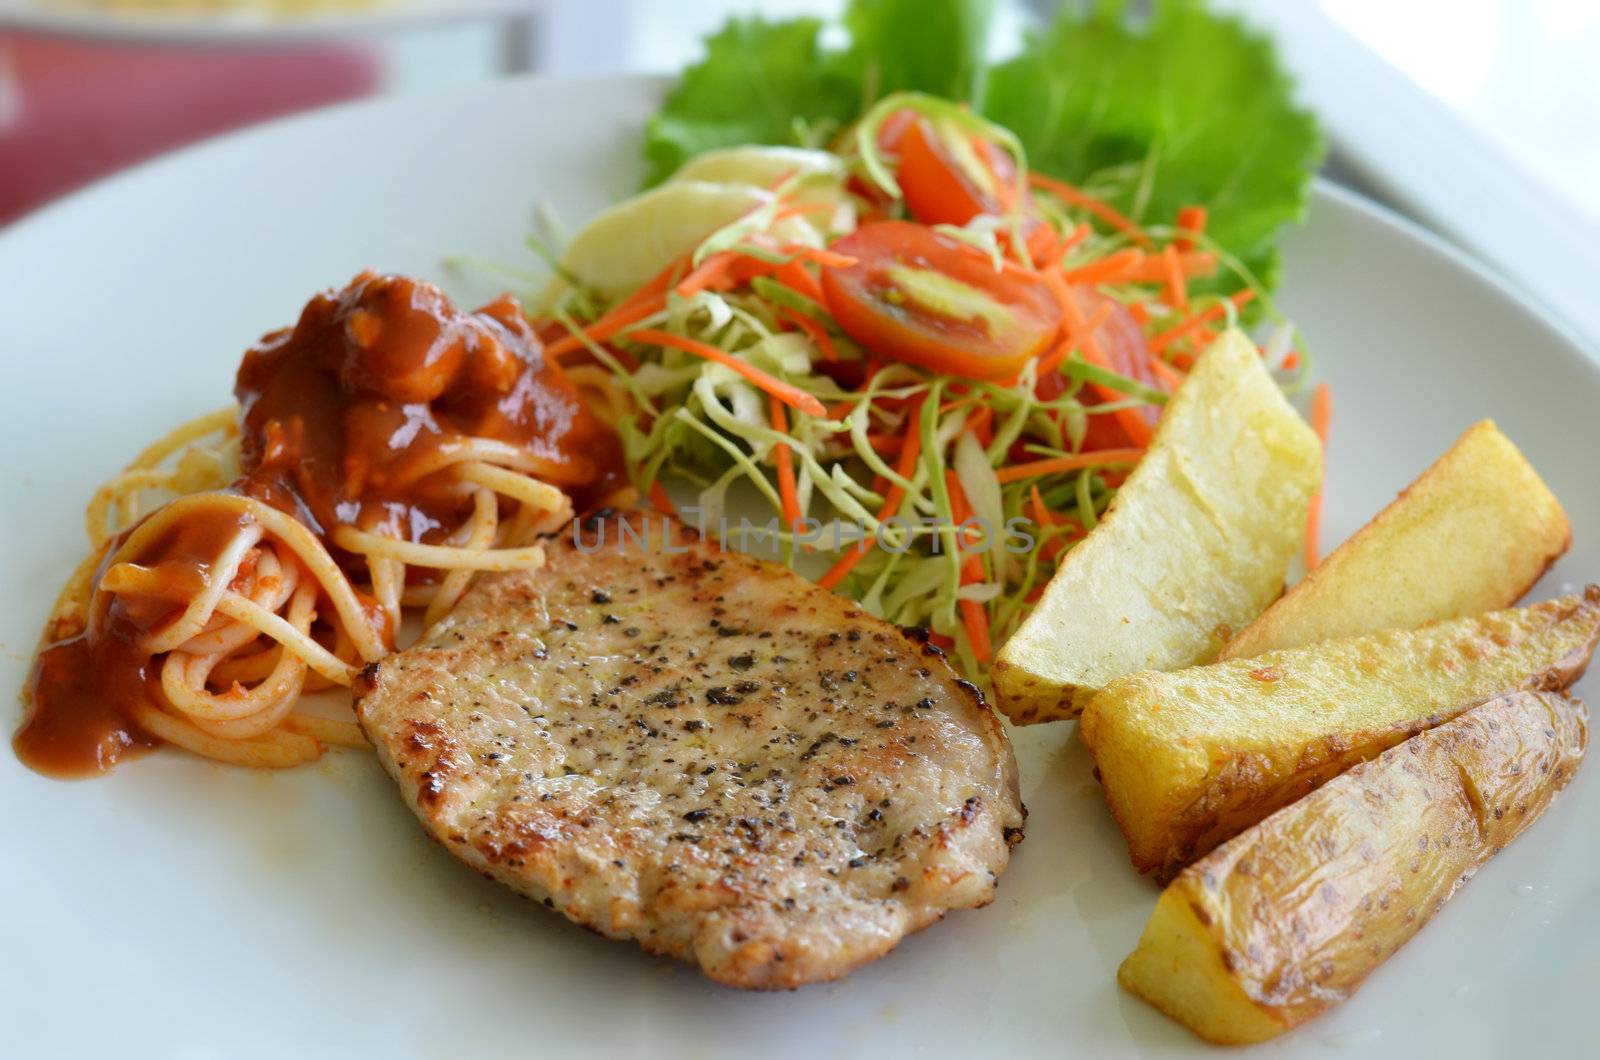 Grilled pork steak served with chips, potatoes and vegetables , spaghetti .